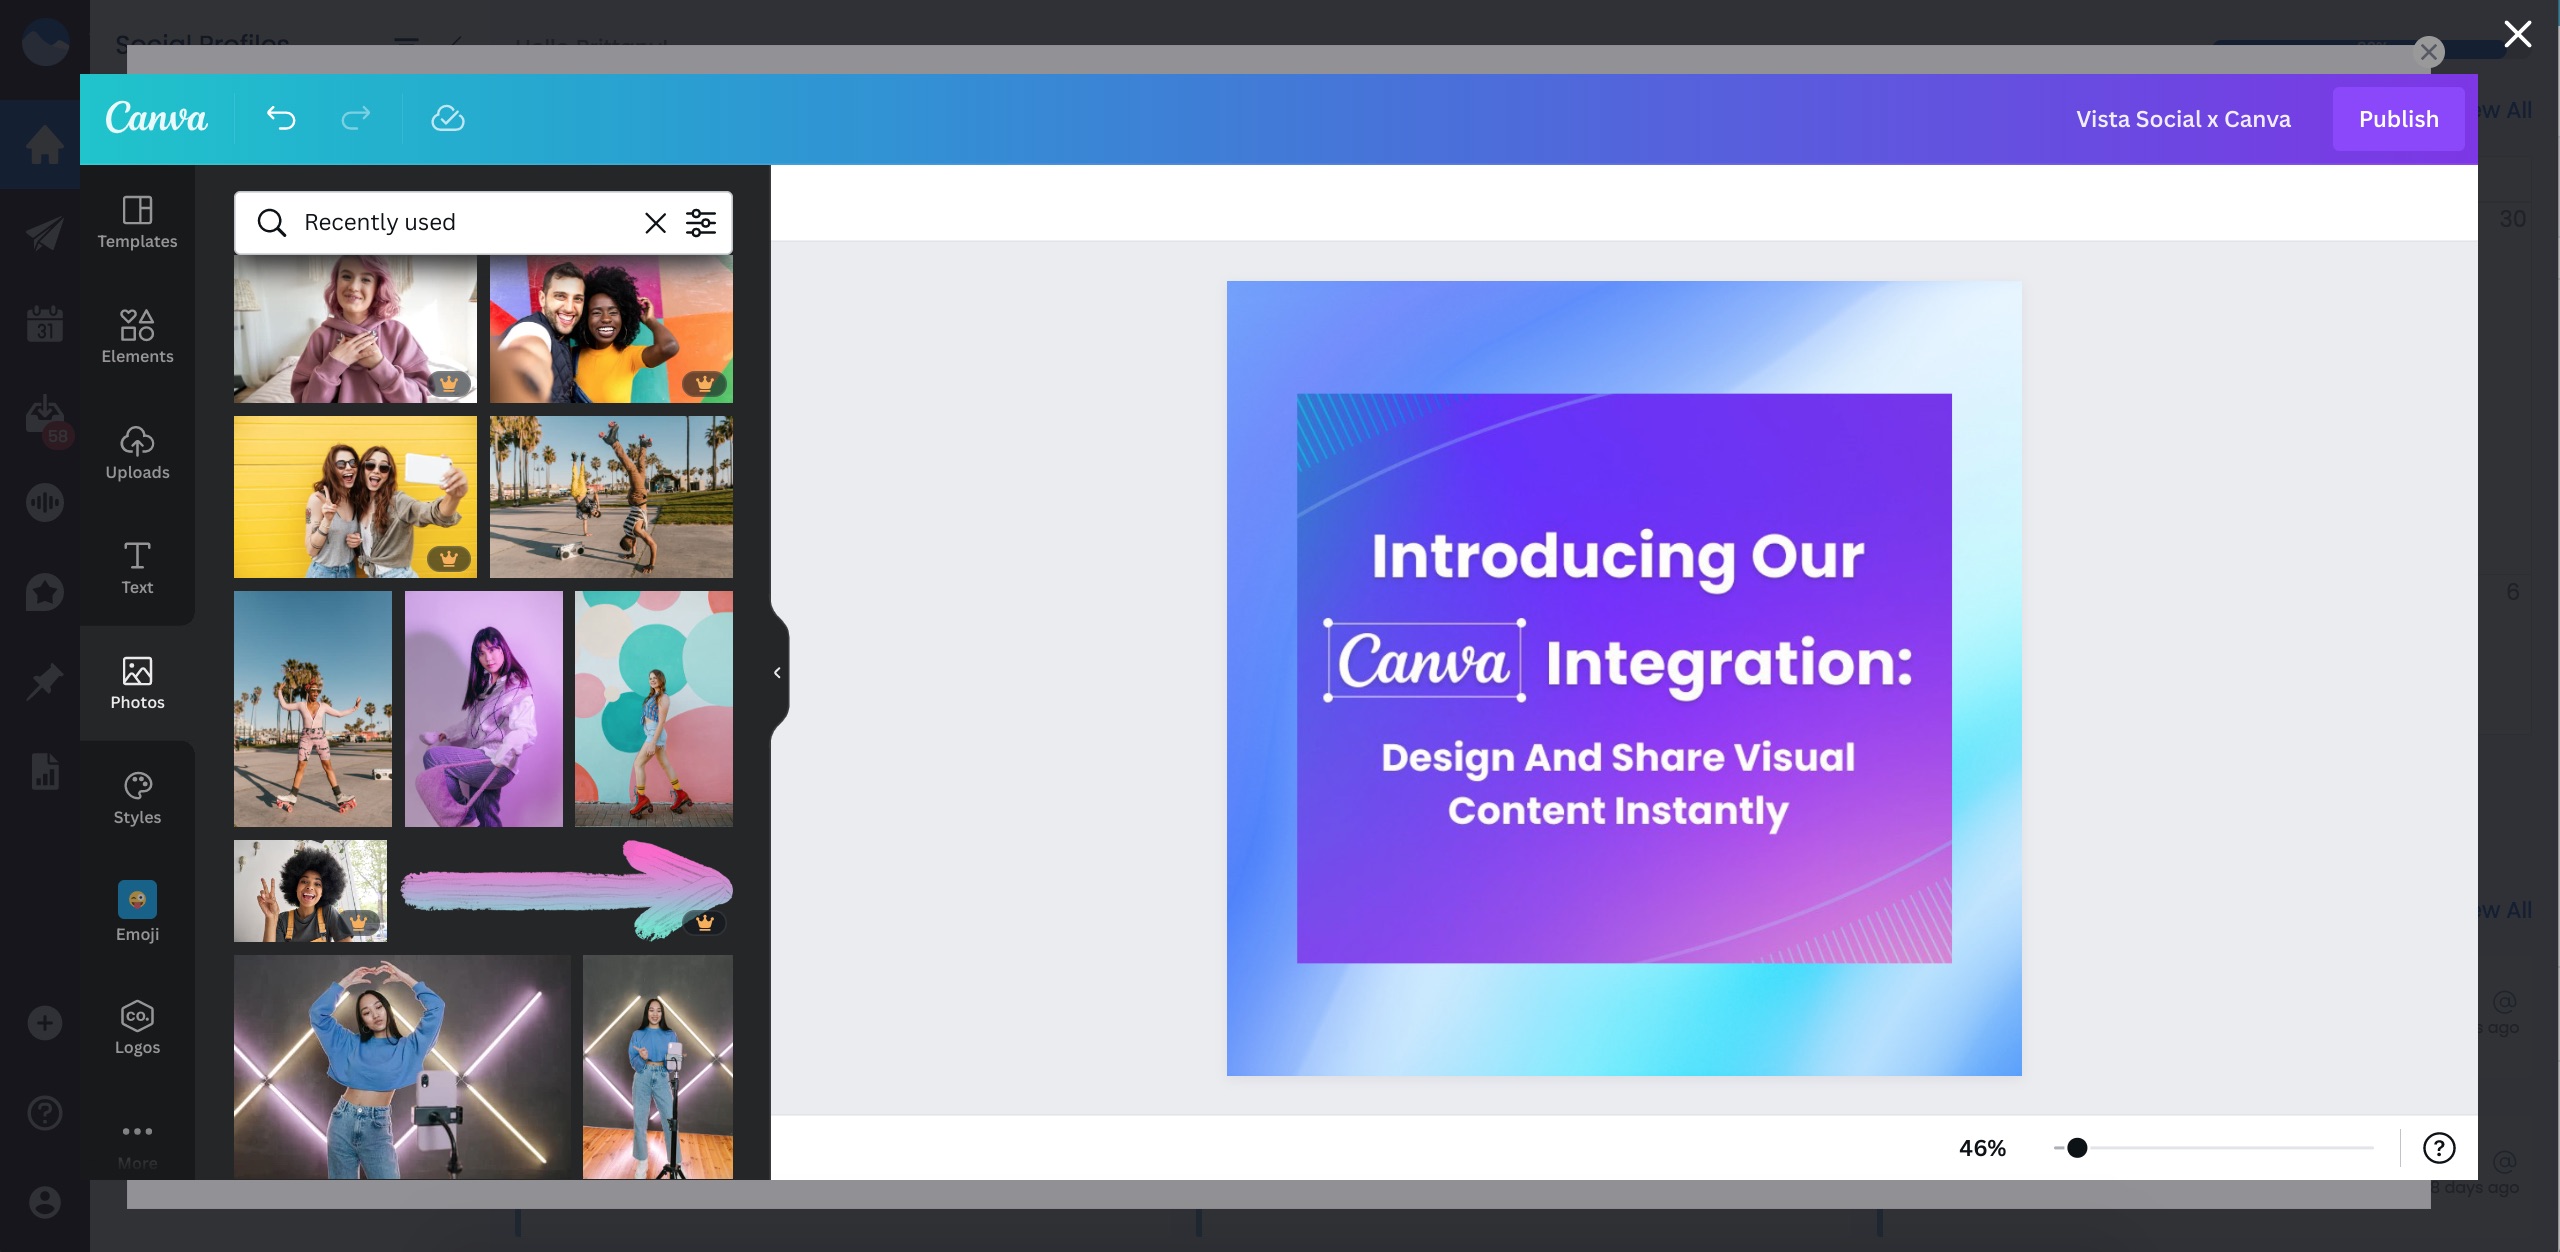 Find Digital Marketing HD Images with Canva in Vista Social